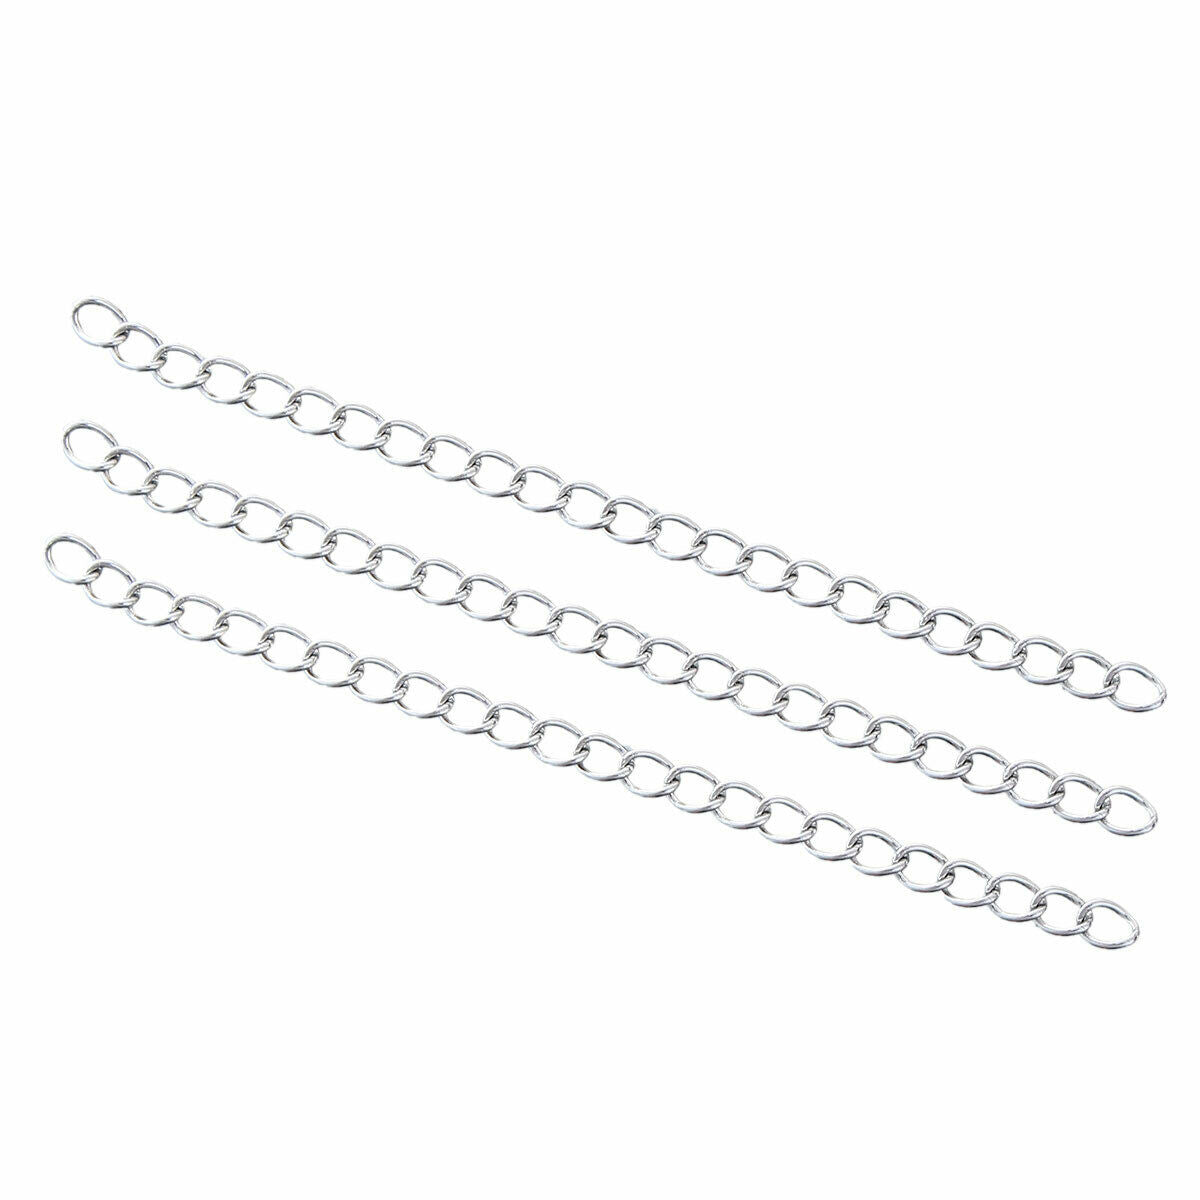 10 Stainless Steel 7cm Extender Chain For Jewelry Necklace Bracelet Silver Tone